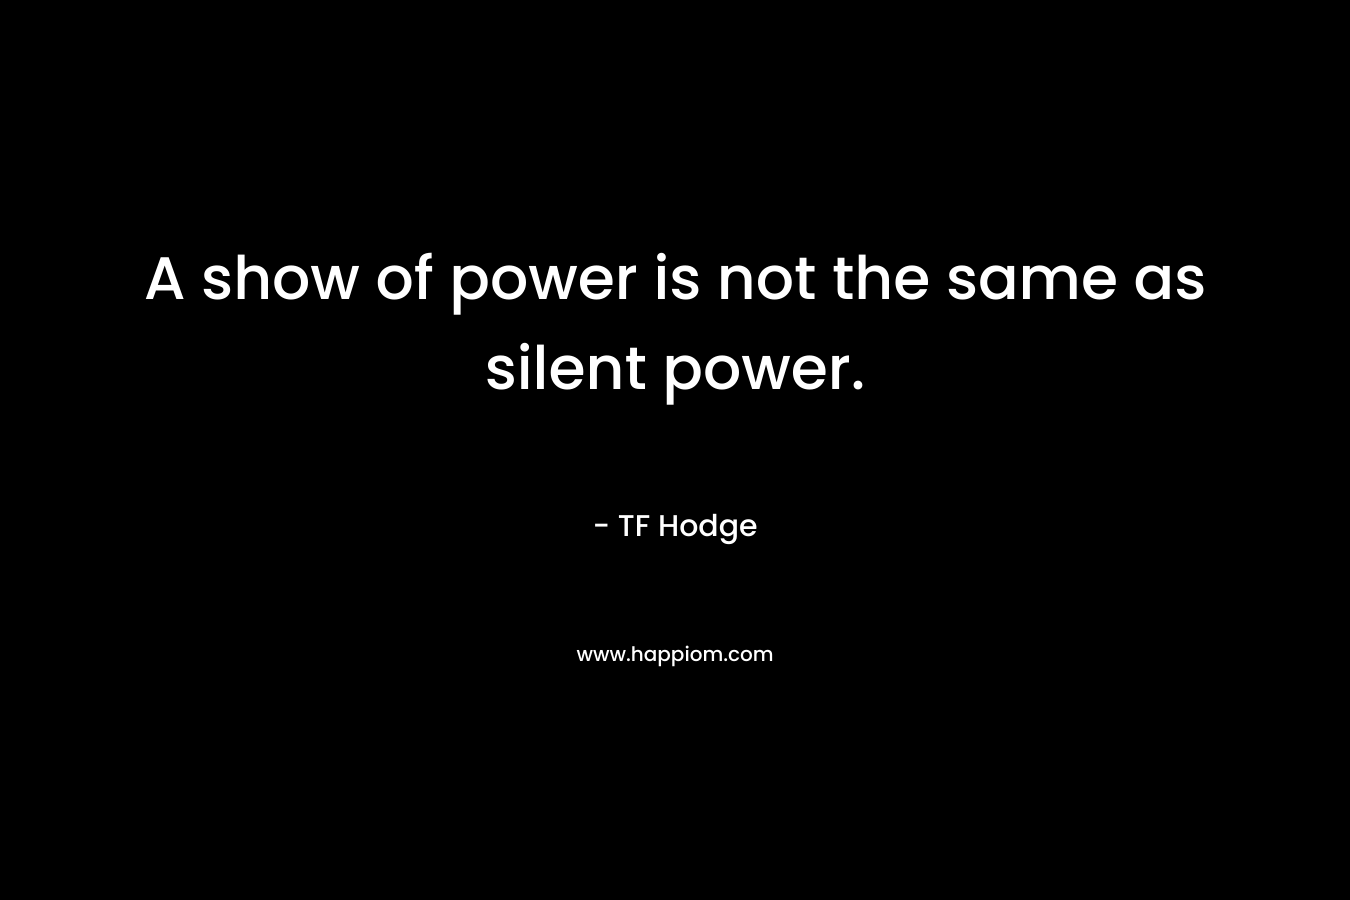 A show of power is not the same as silent power.